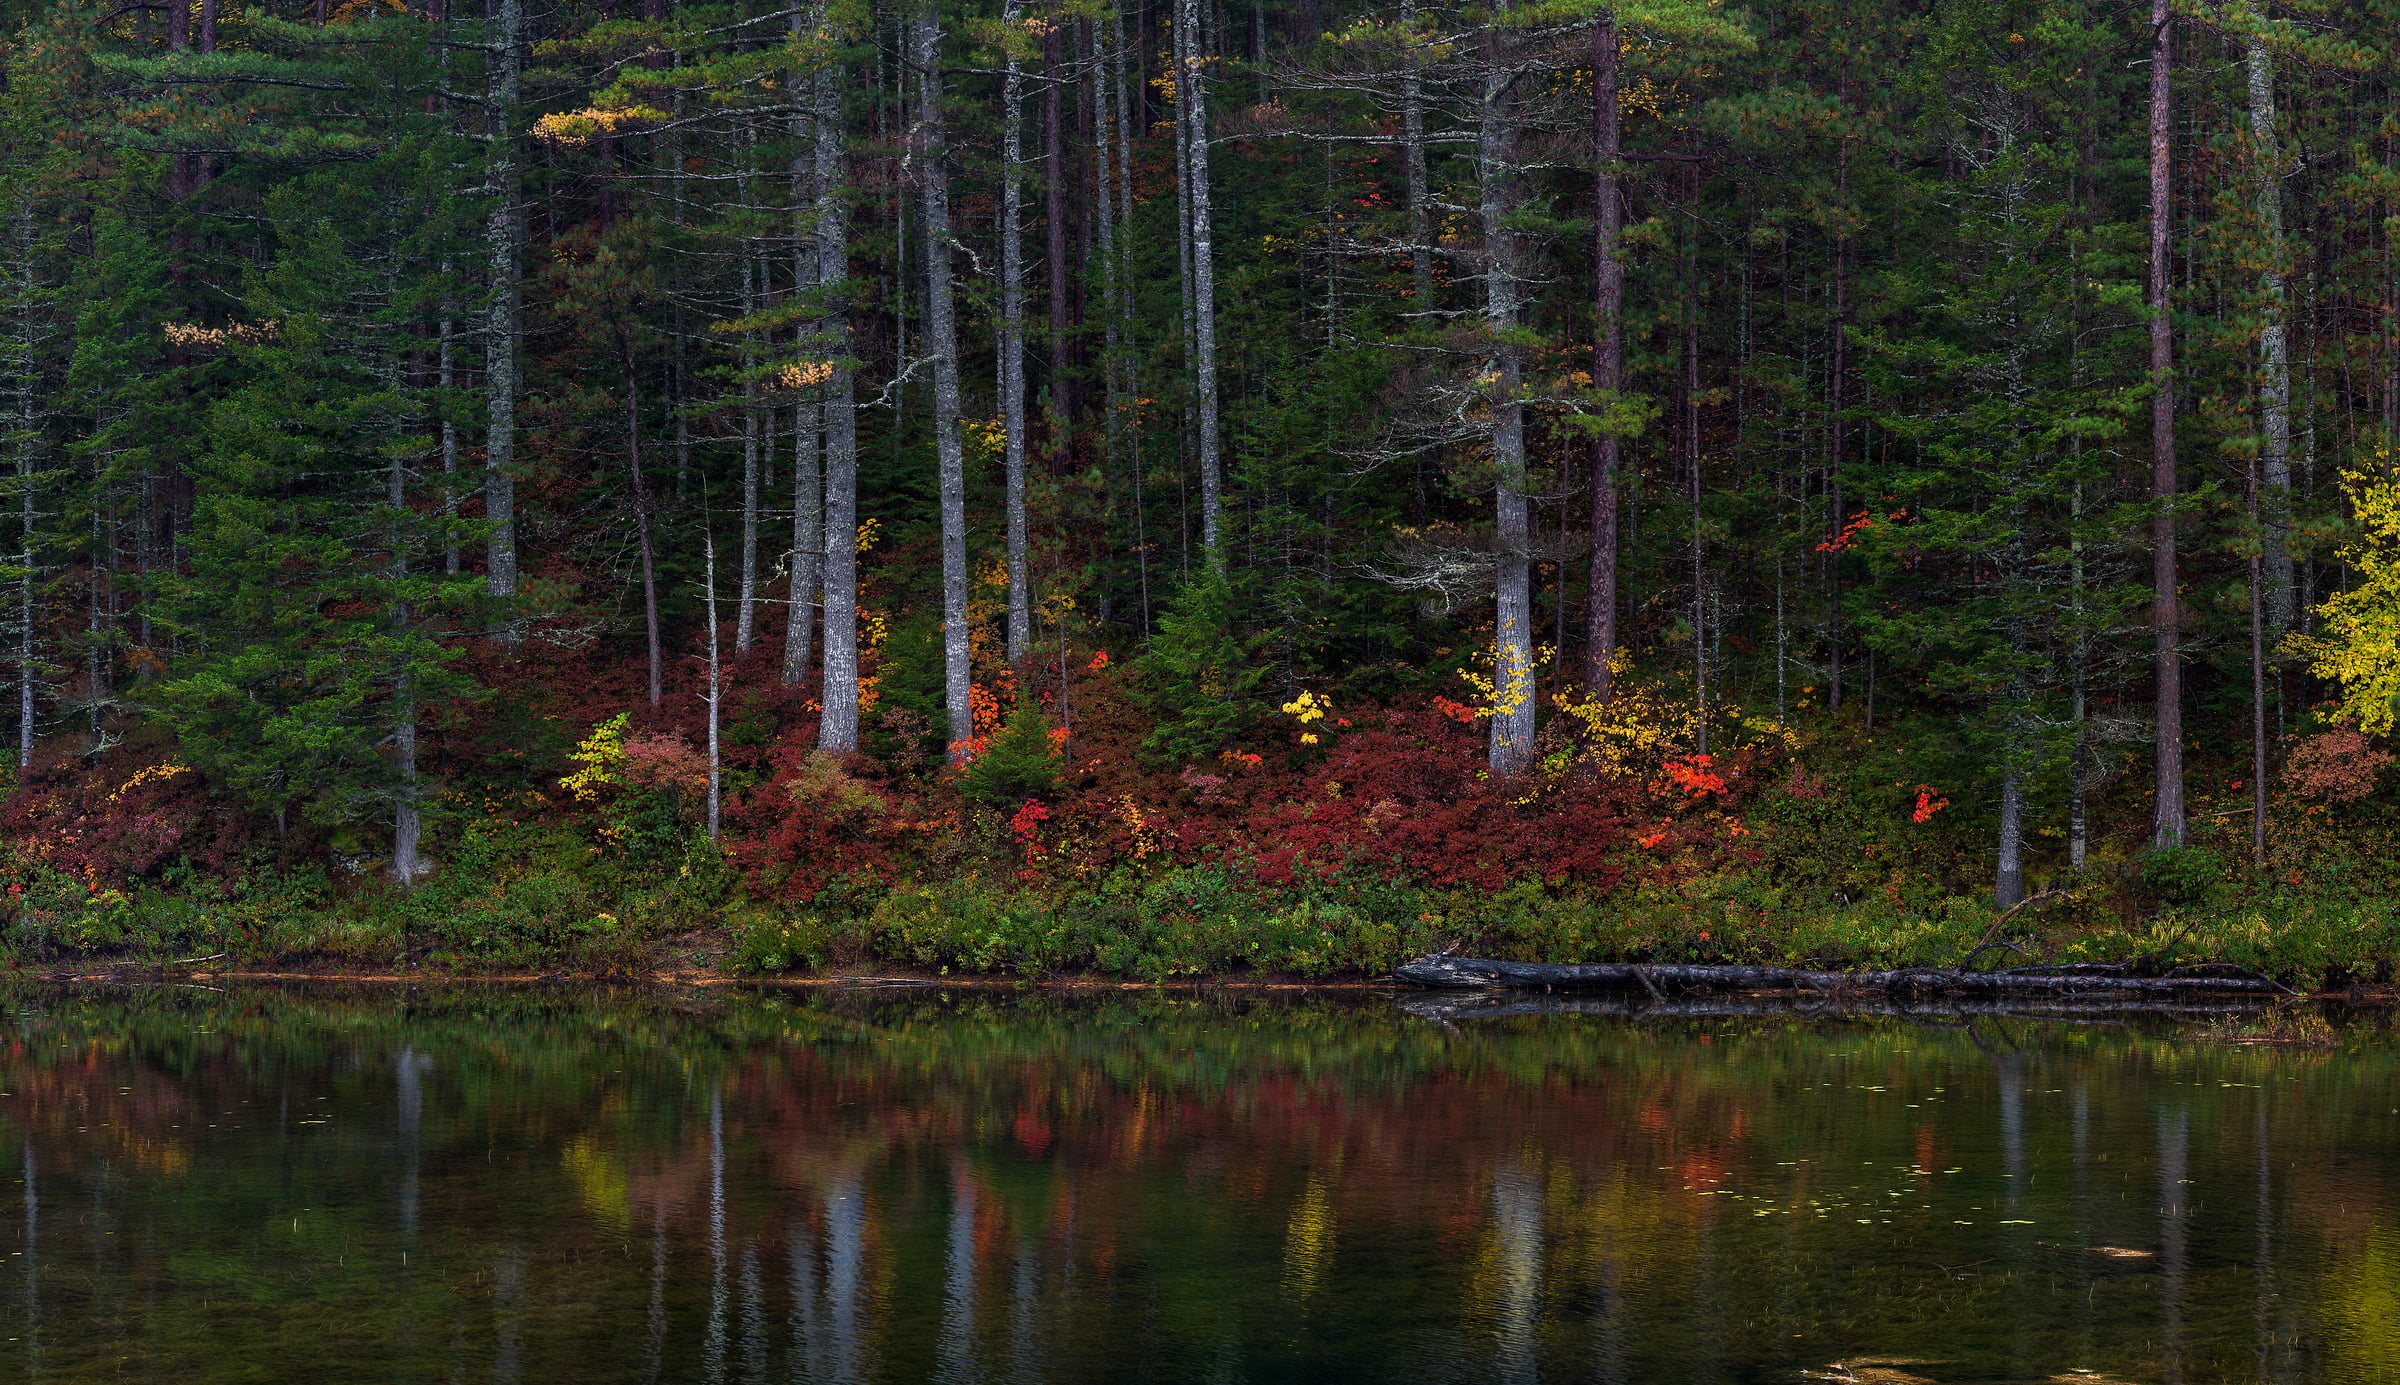 715 megapixels! A very high resolution, large-format VAST photo print of woods with a pond in the foreground; nature photograph created by Aaron Priest in Abol Pond, Greenville, Maine.